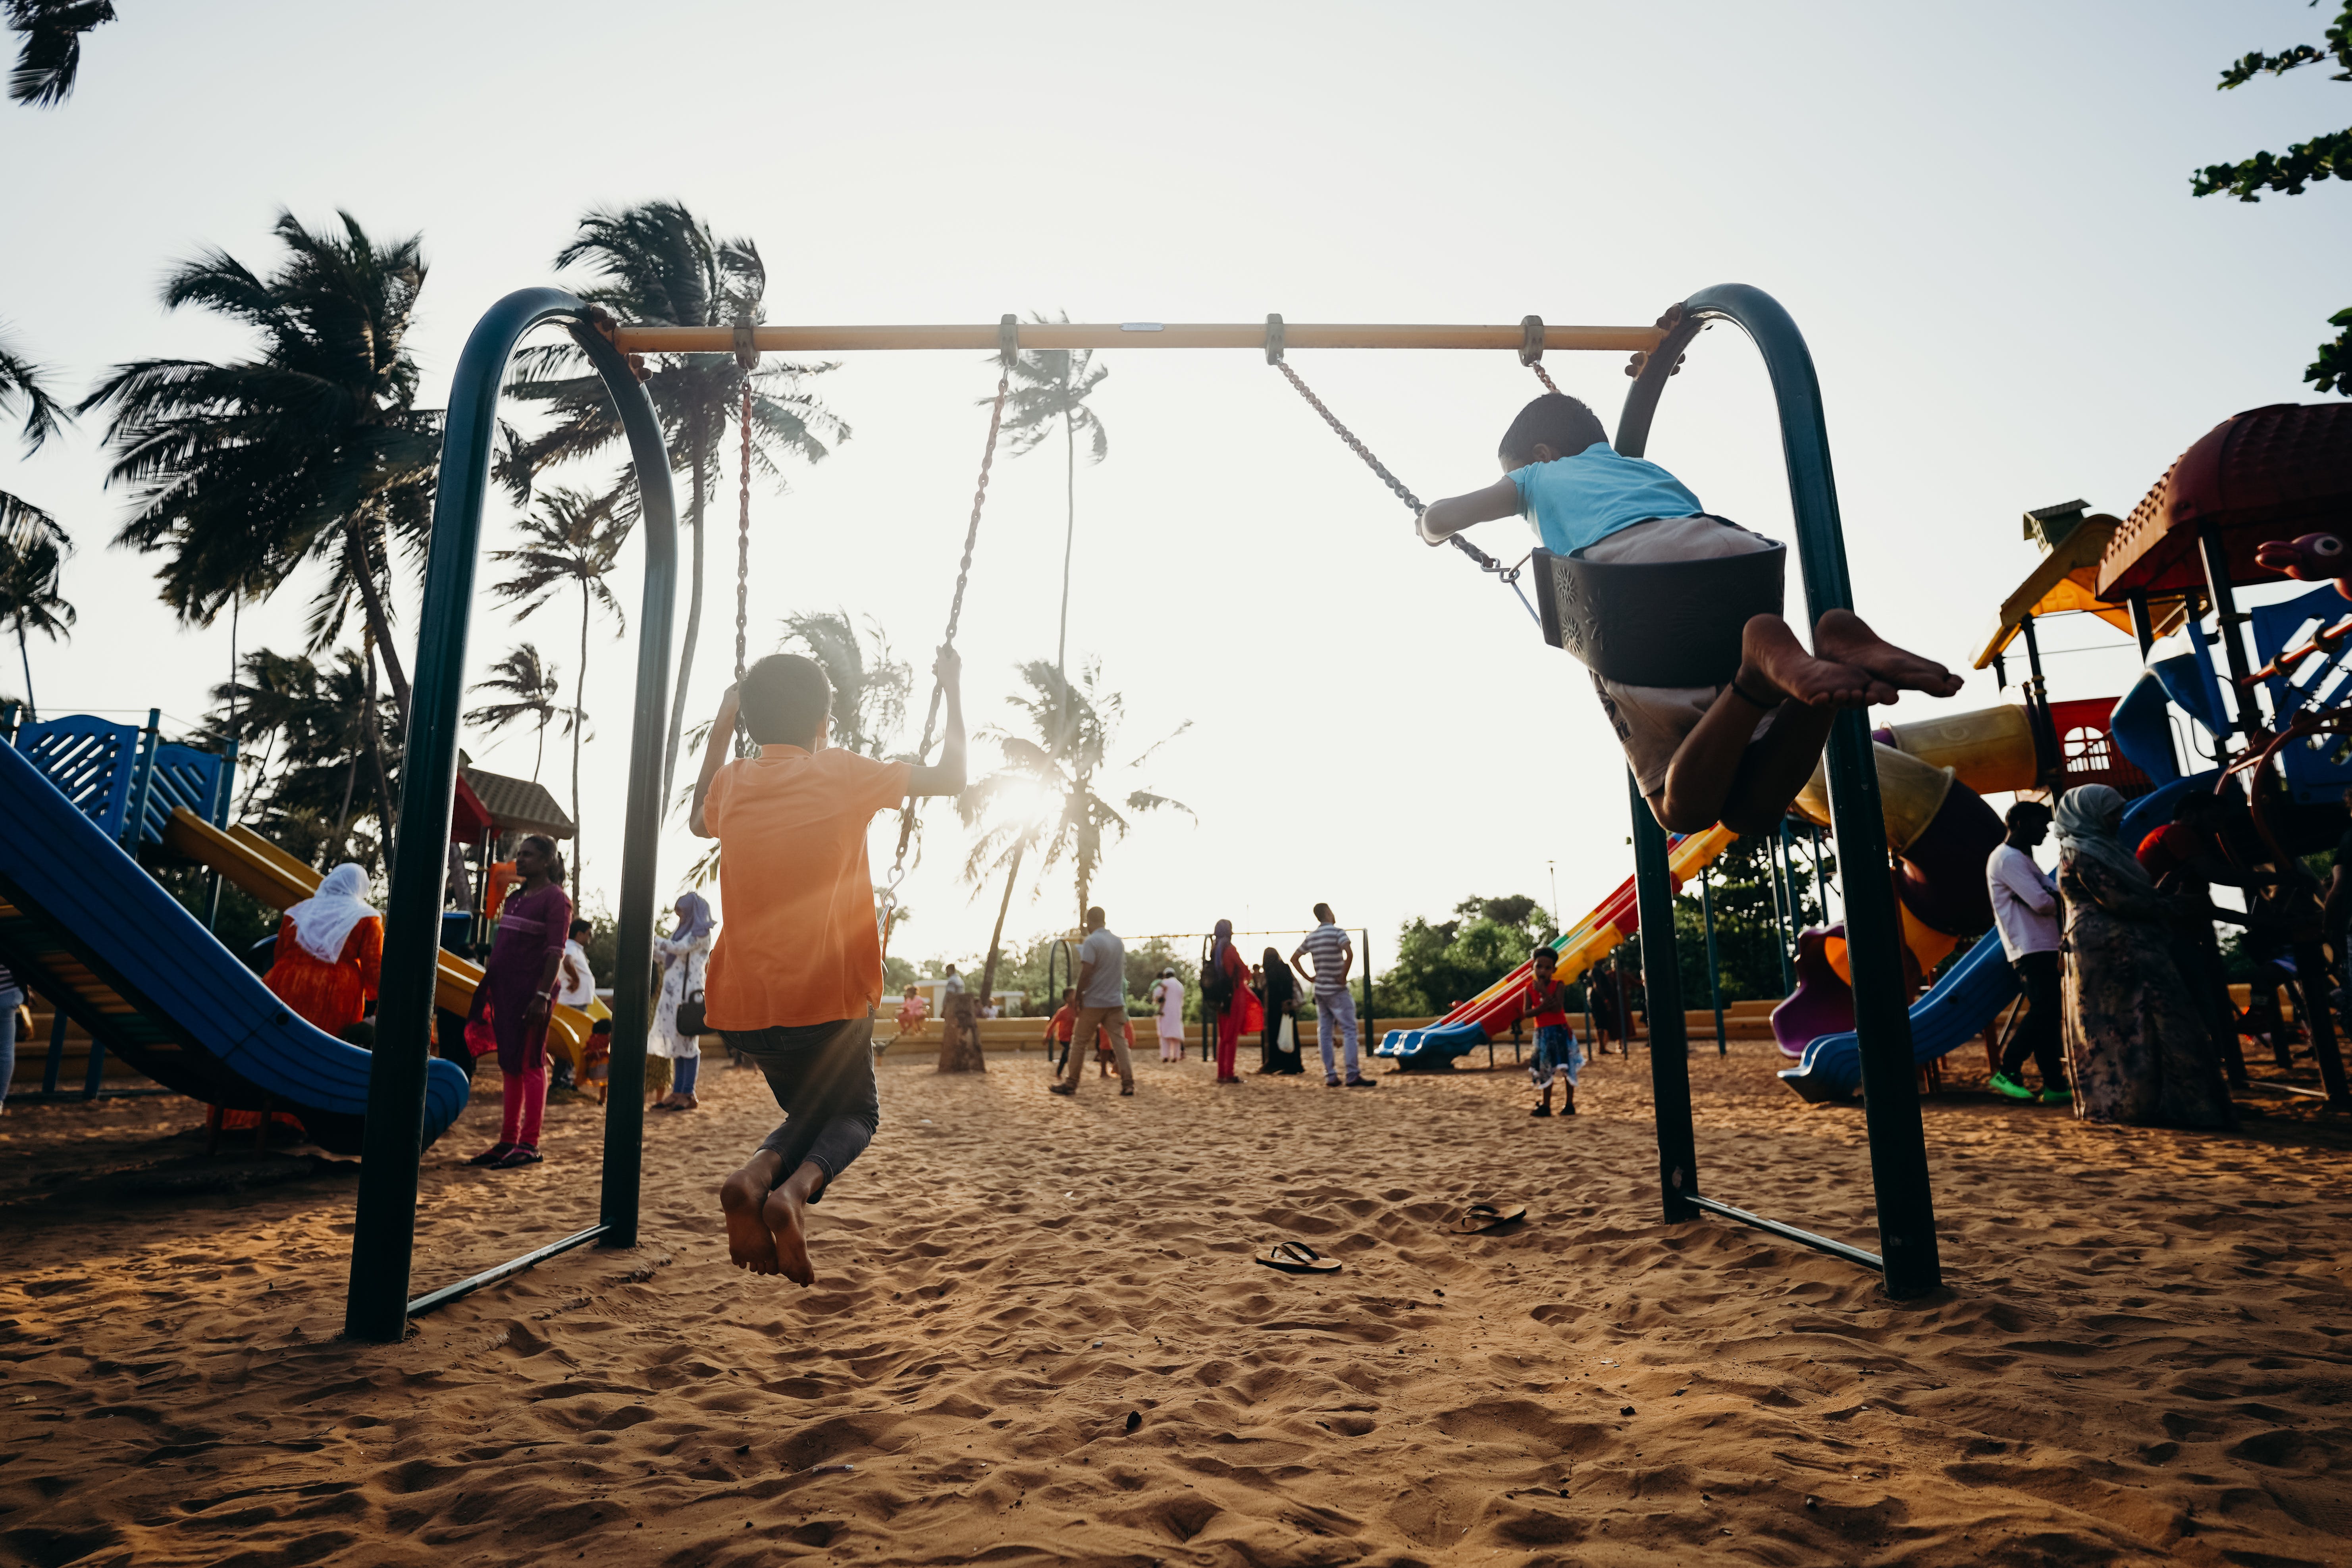 Highly sensitive children swinging on swings at the playground. There are many children and parents around.